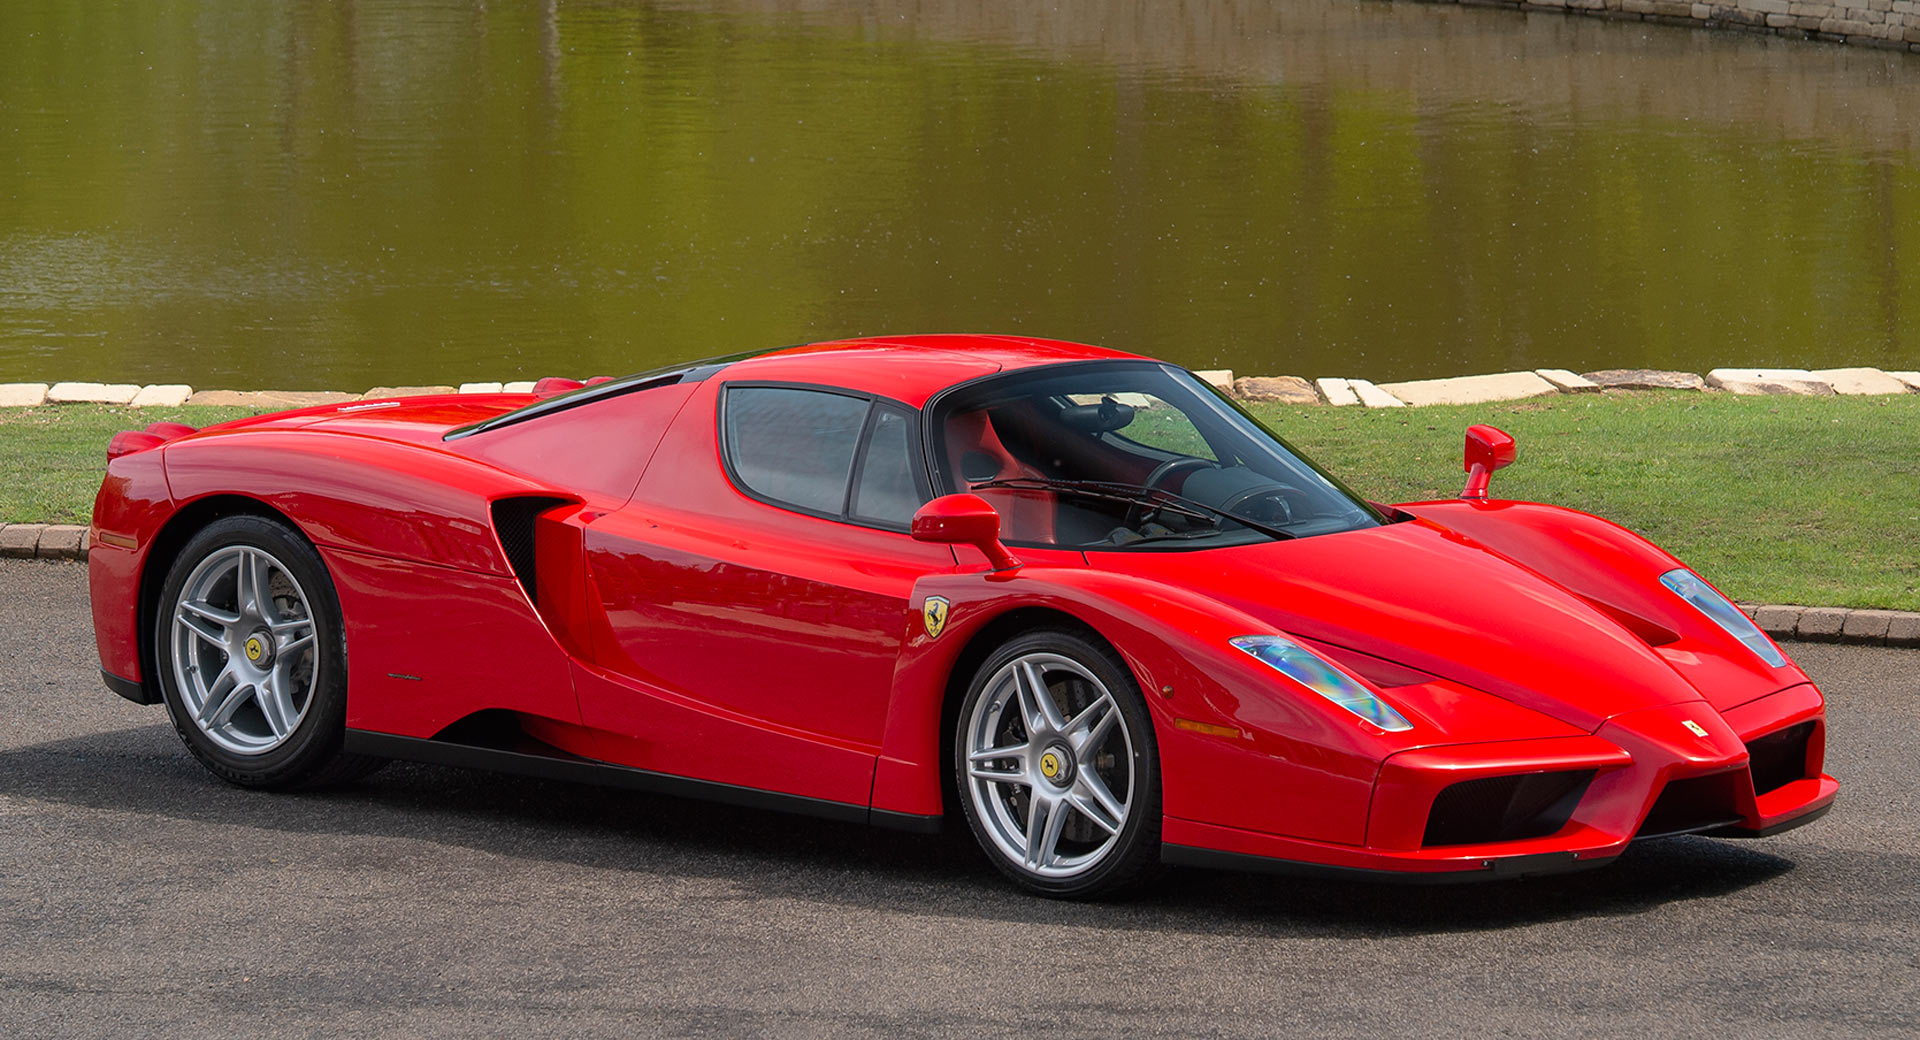 This The Ferrari Enzo Ever Built And It's For Sale | Carscoops